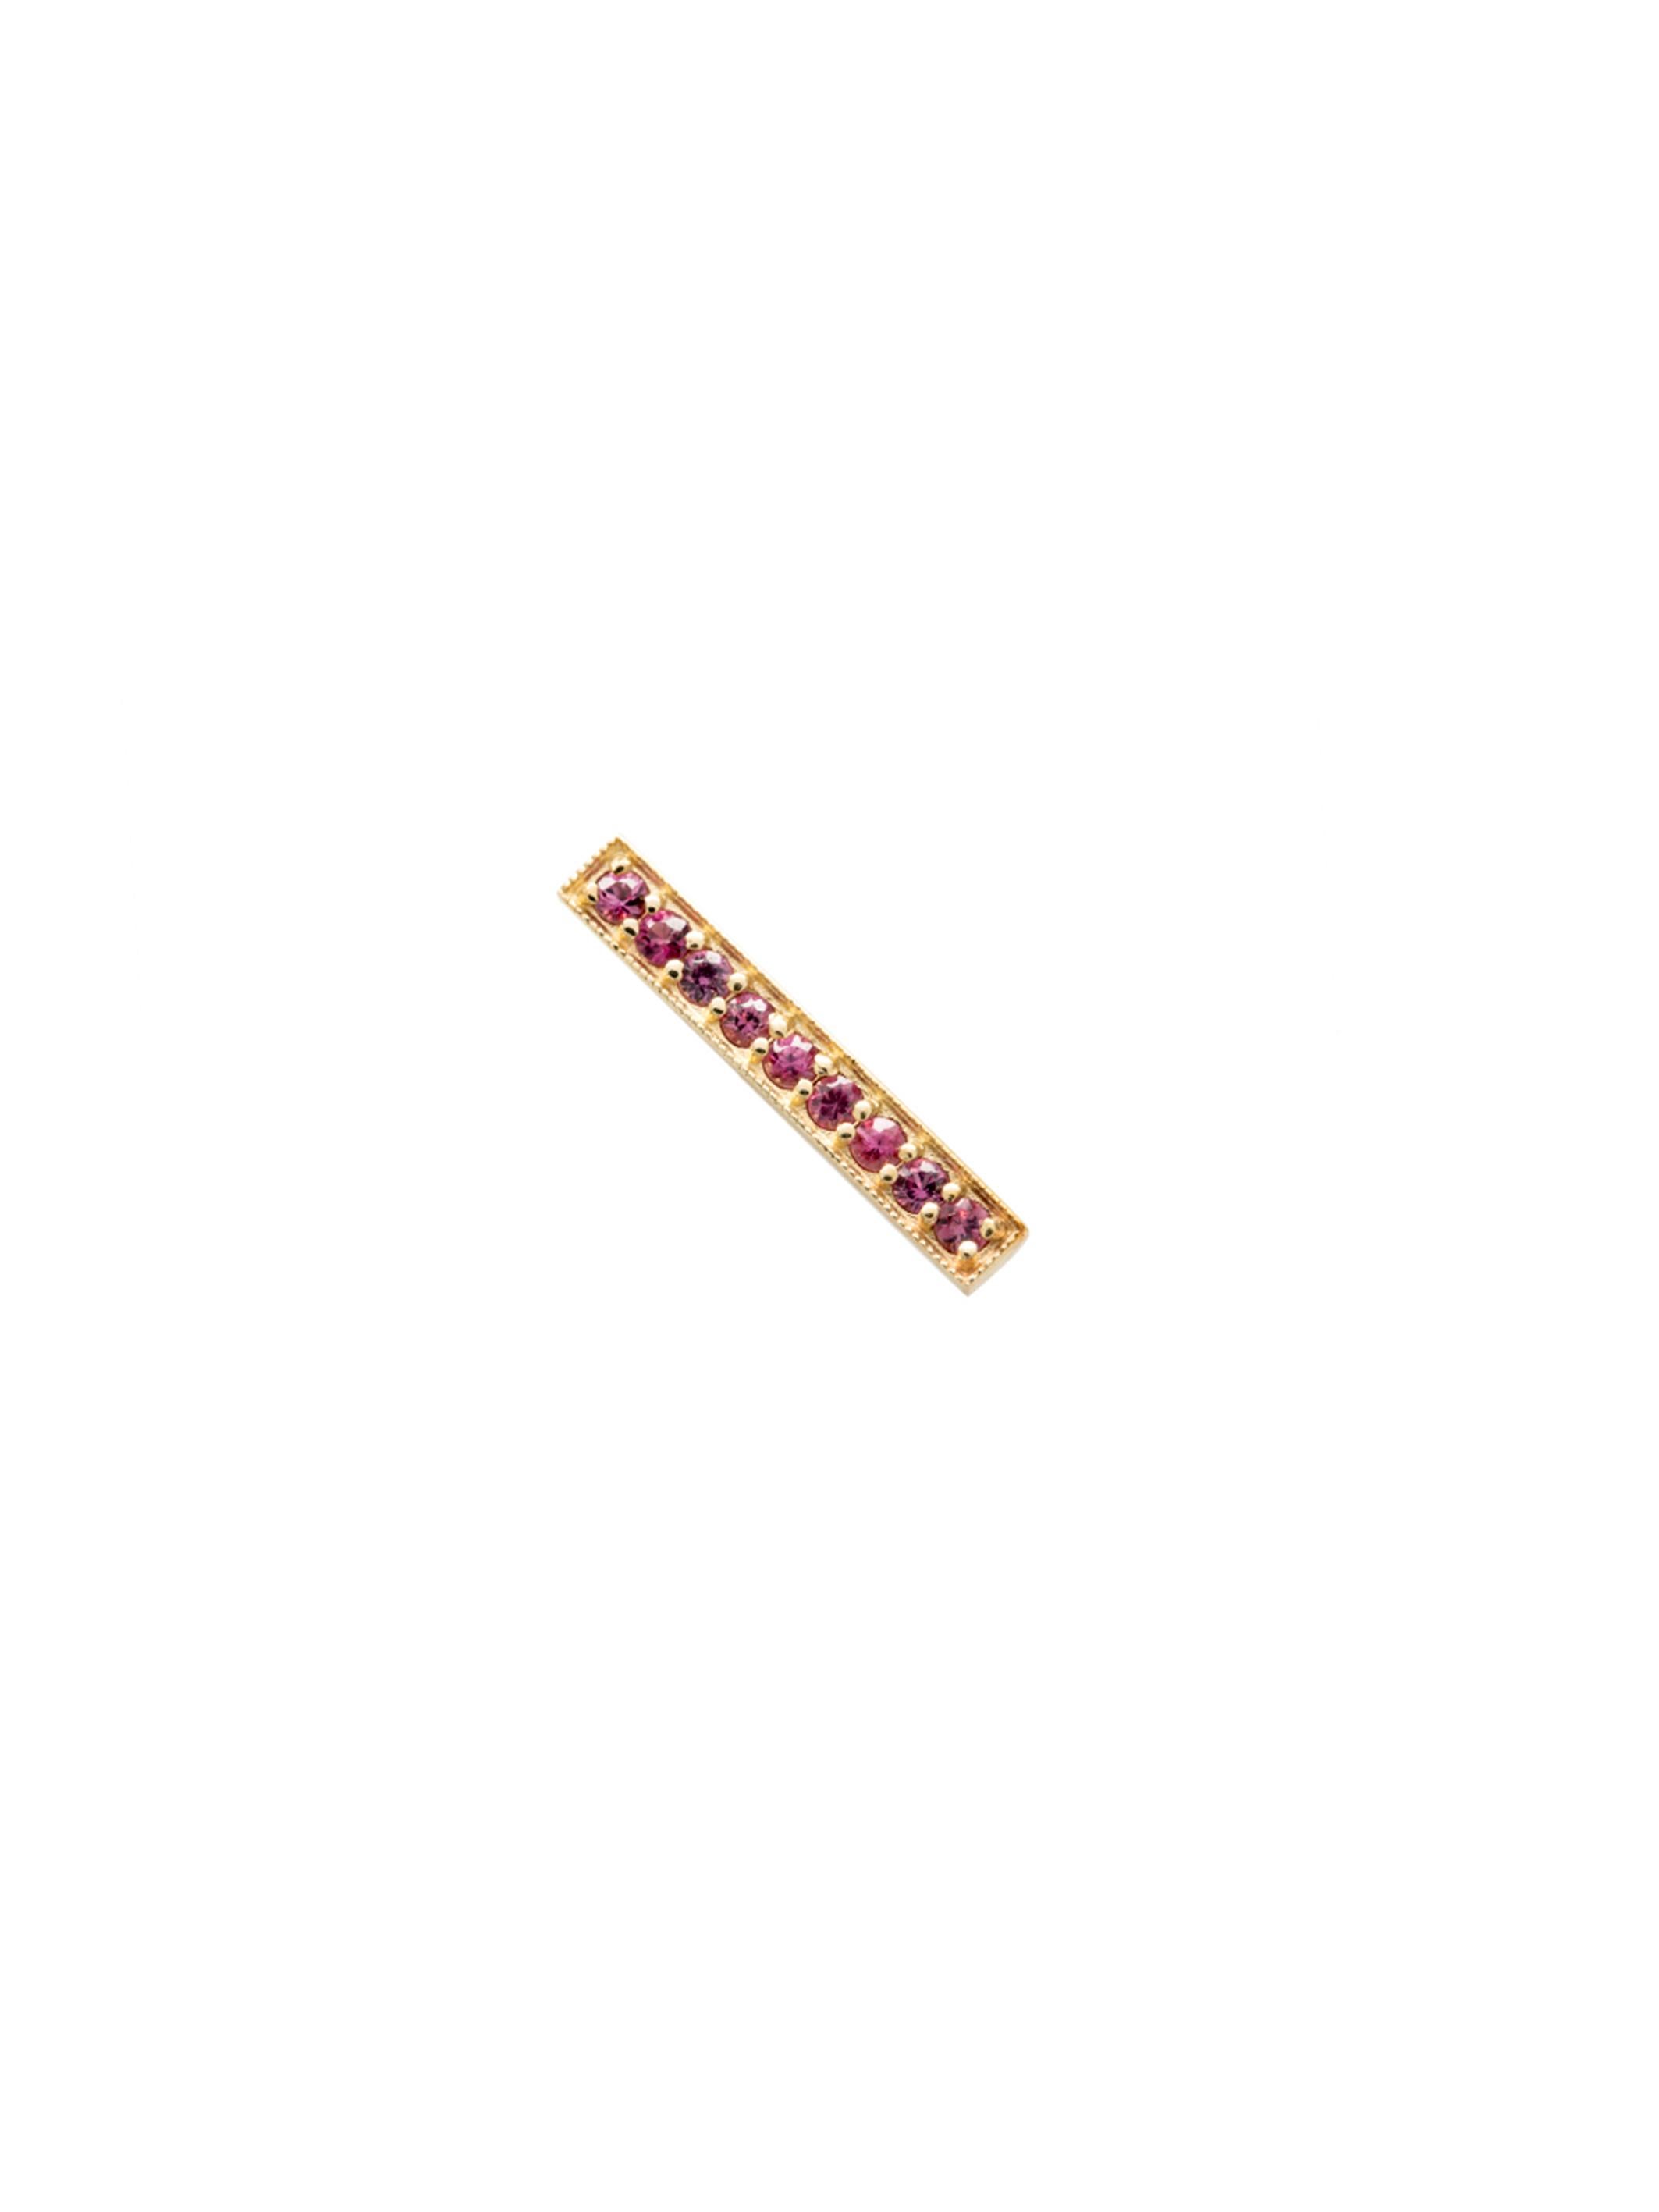 Minimal Threads Earring in 9 Karat Yellow Gold Pink Sapphire Pavé For Sale 1